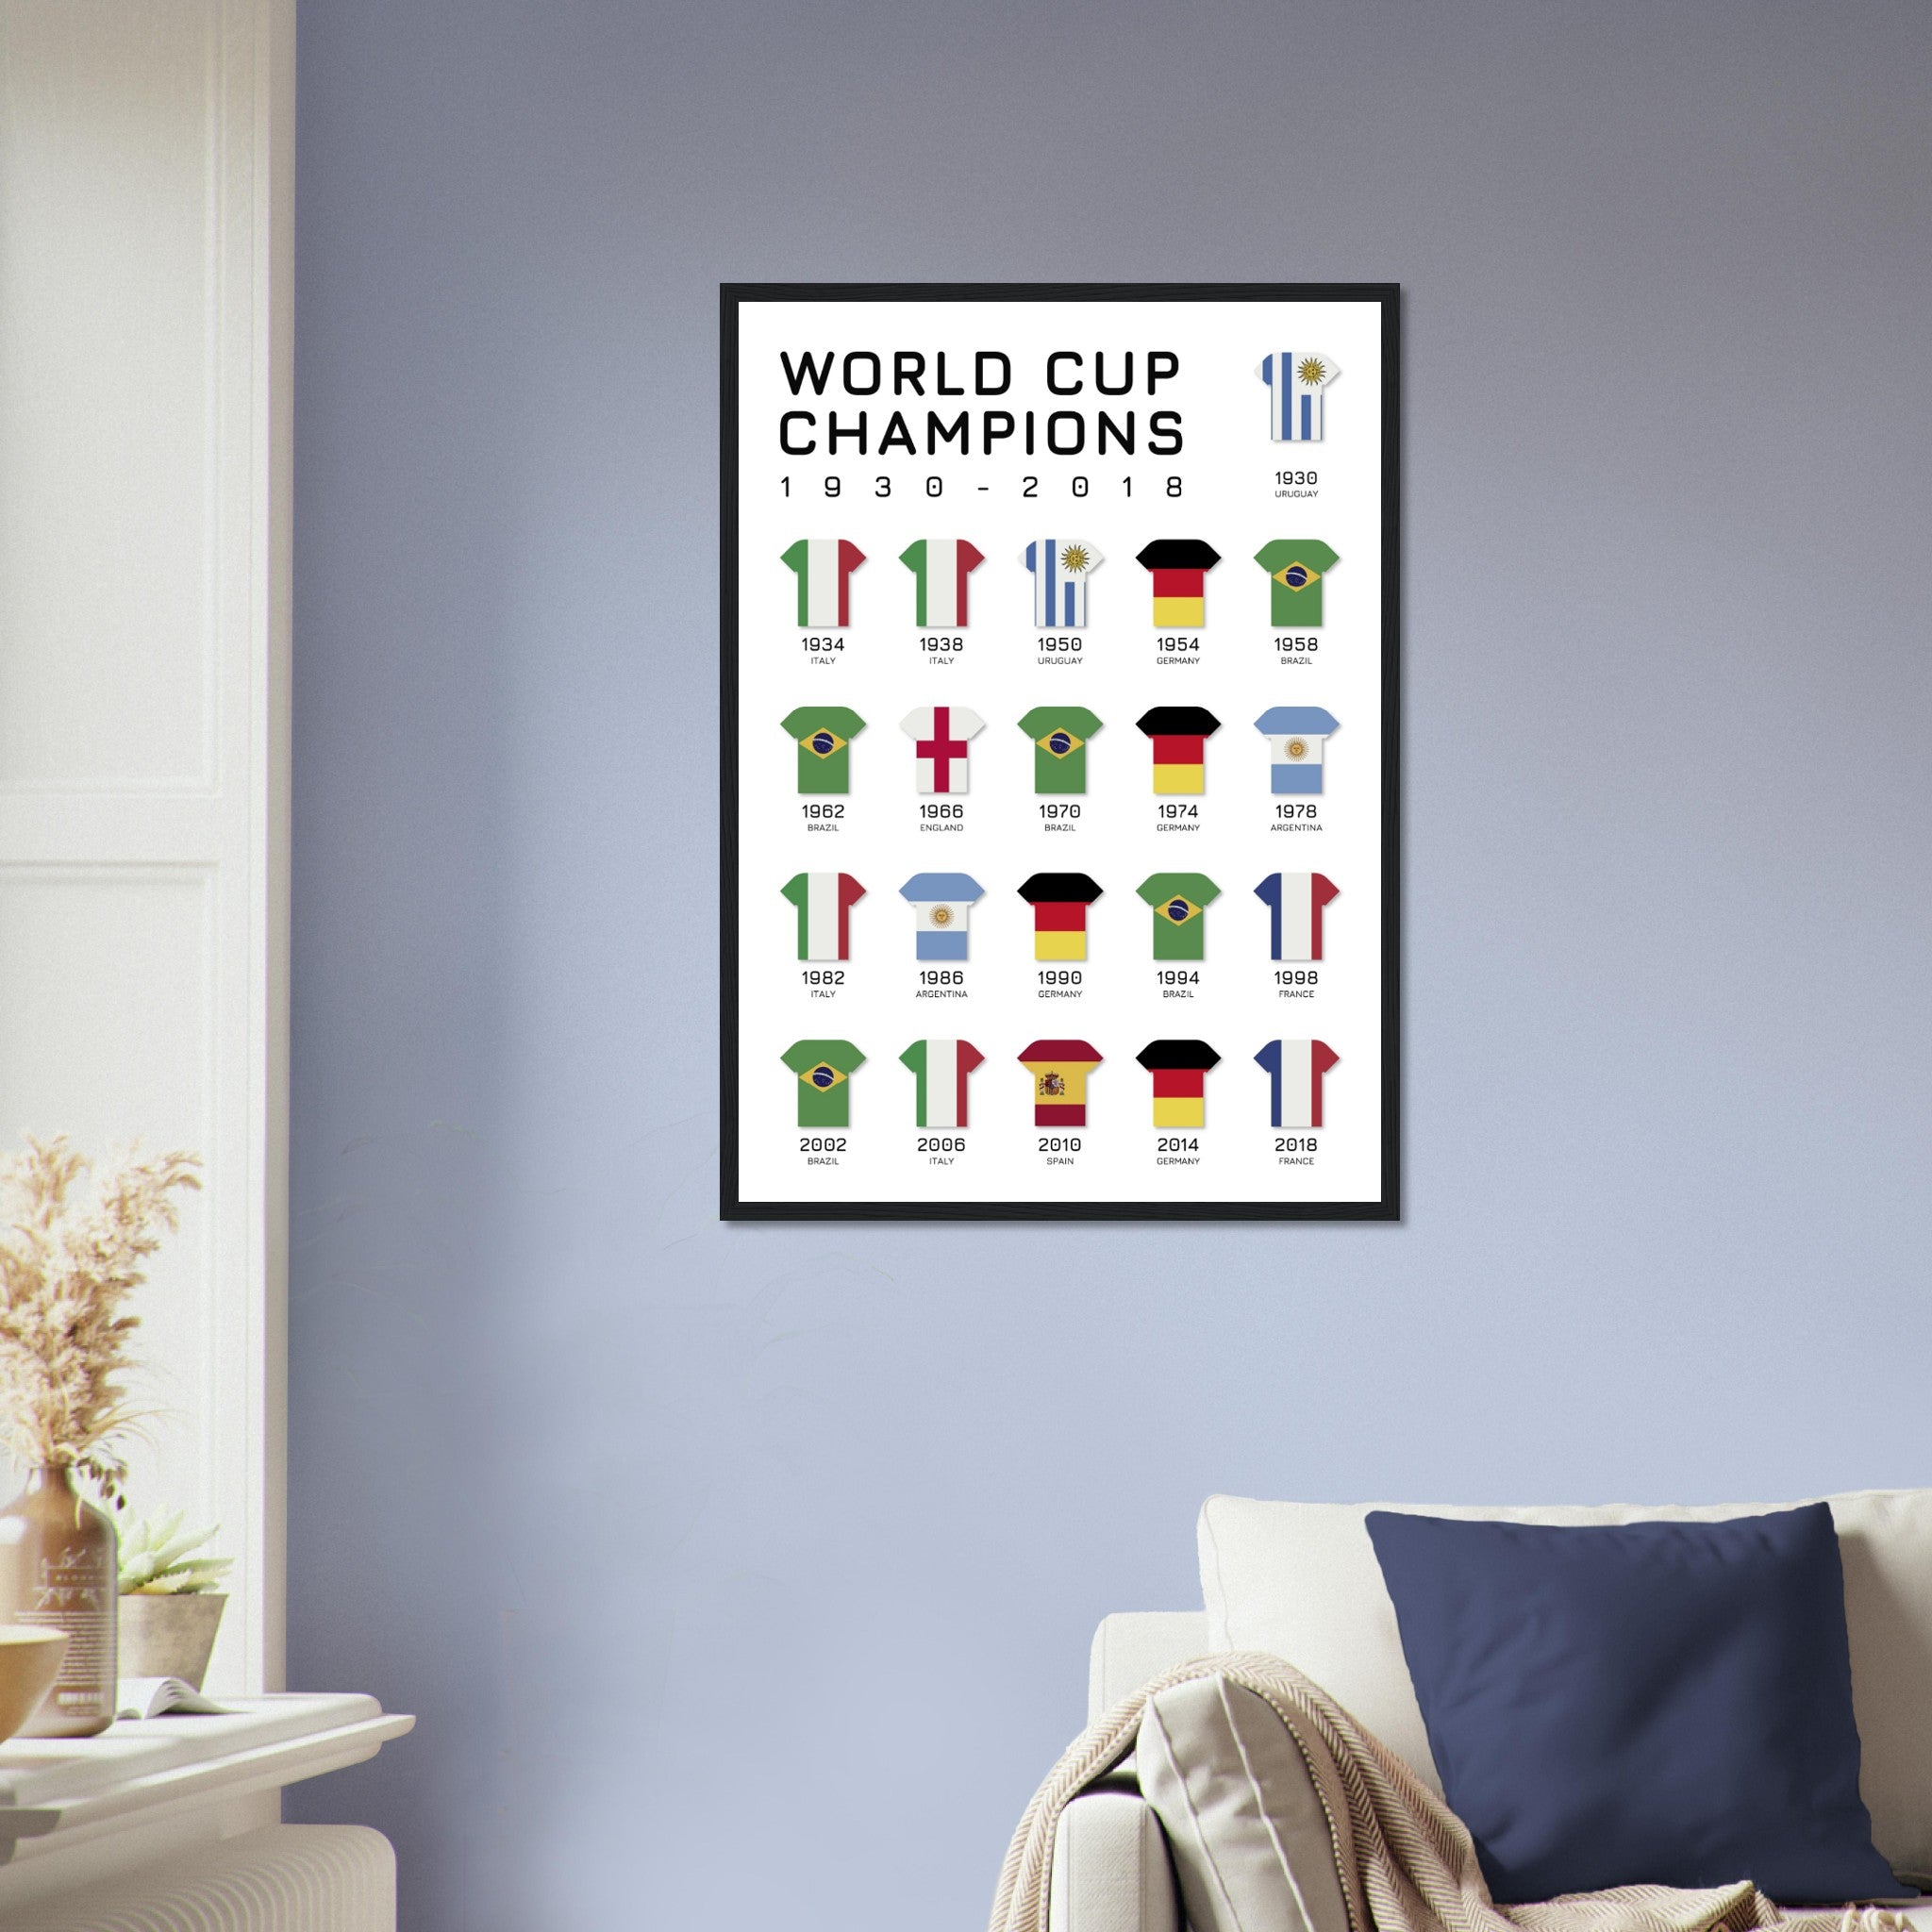 World Cup Champions 1 Poster